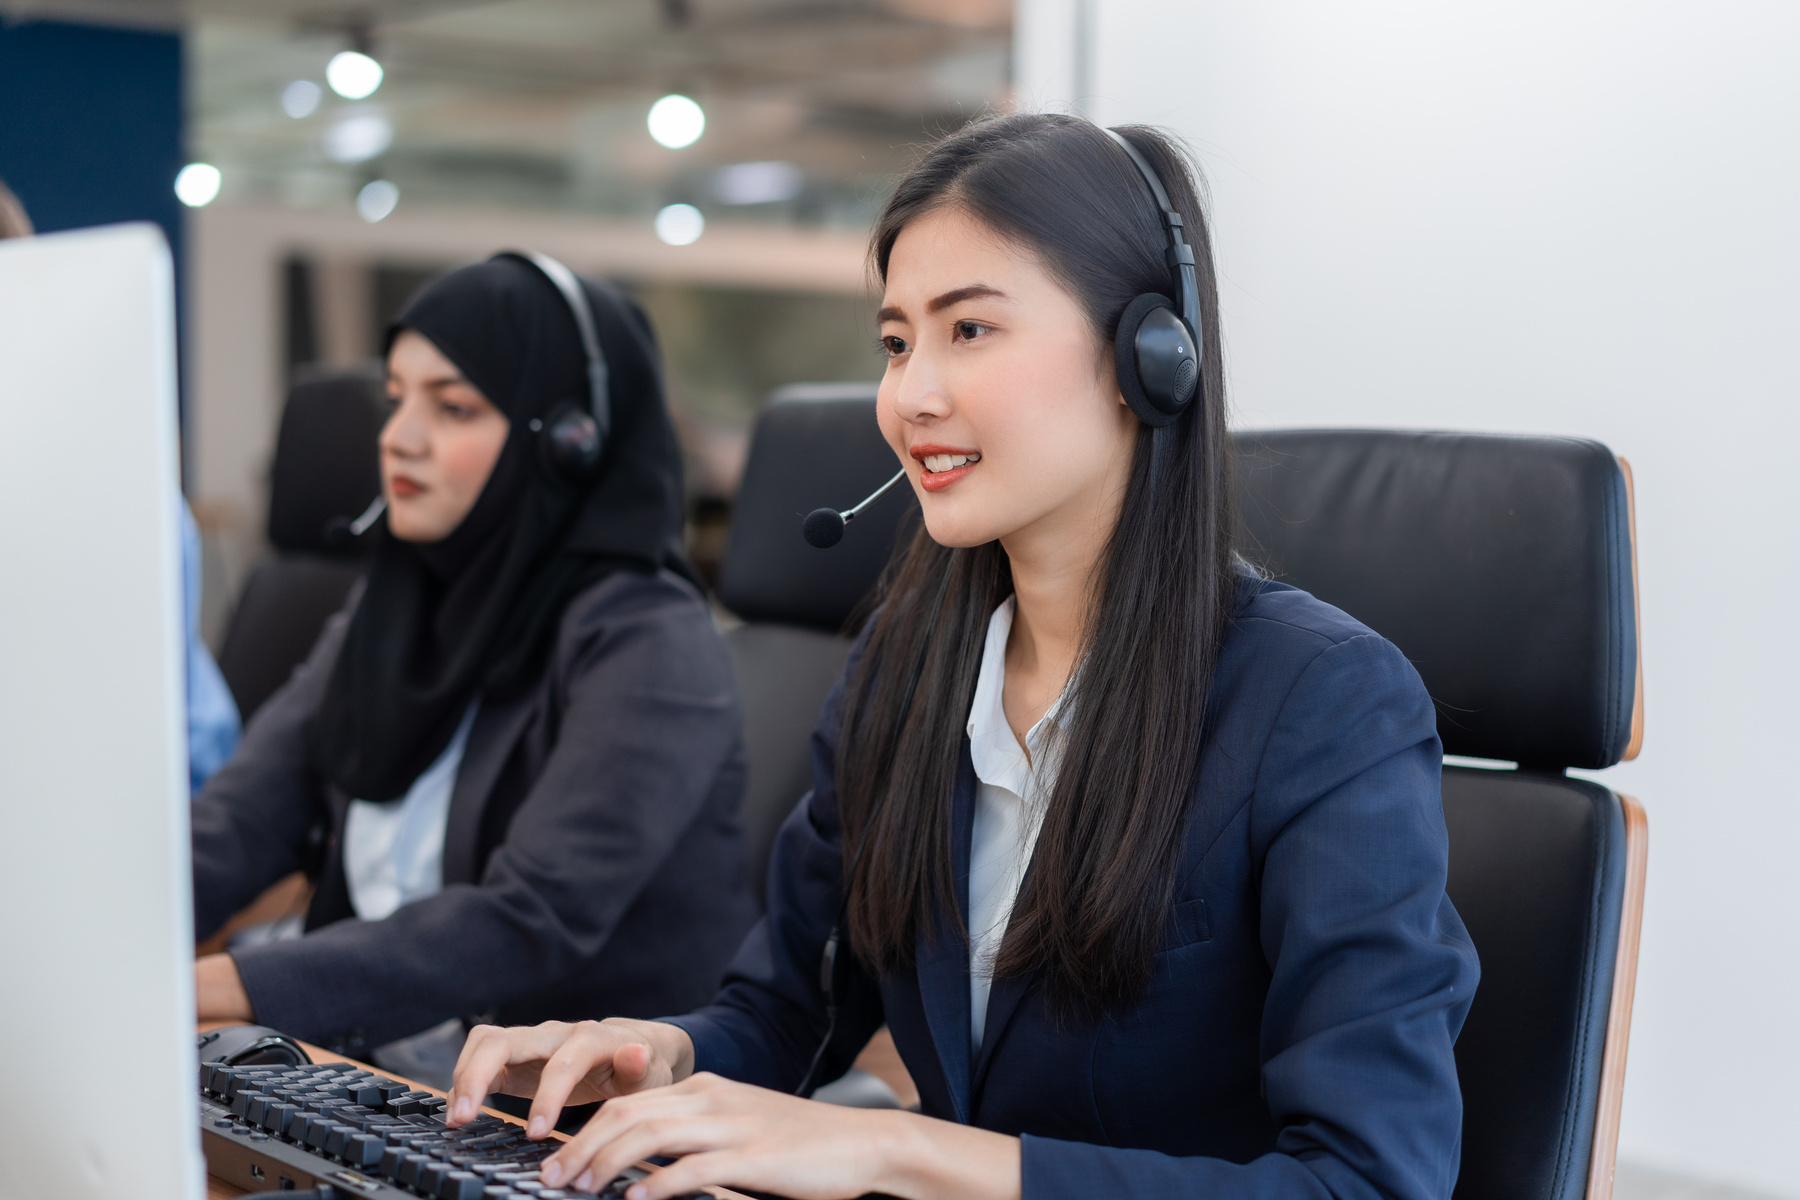 Customer Service Agent with Headsets Working in a Call Center